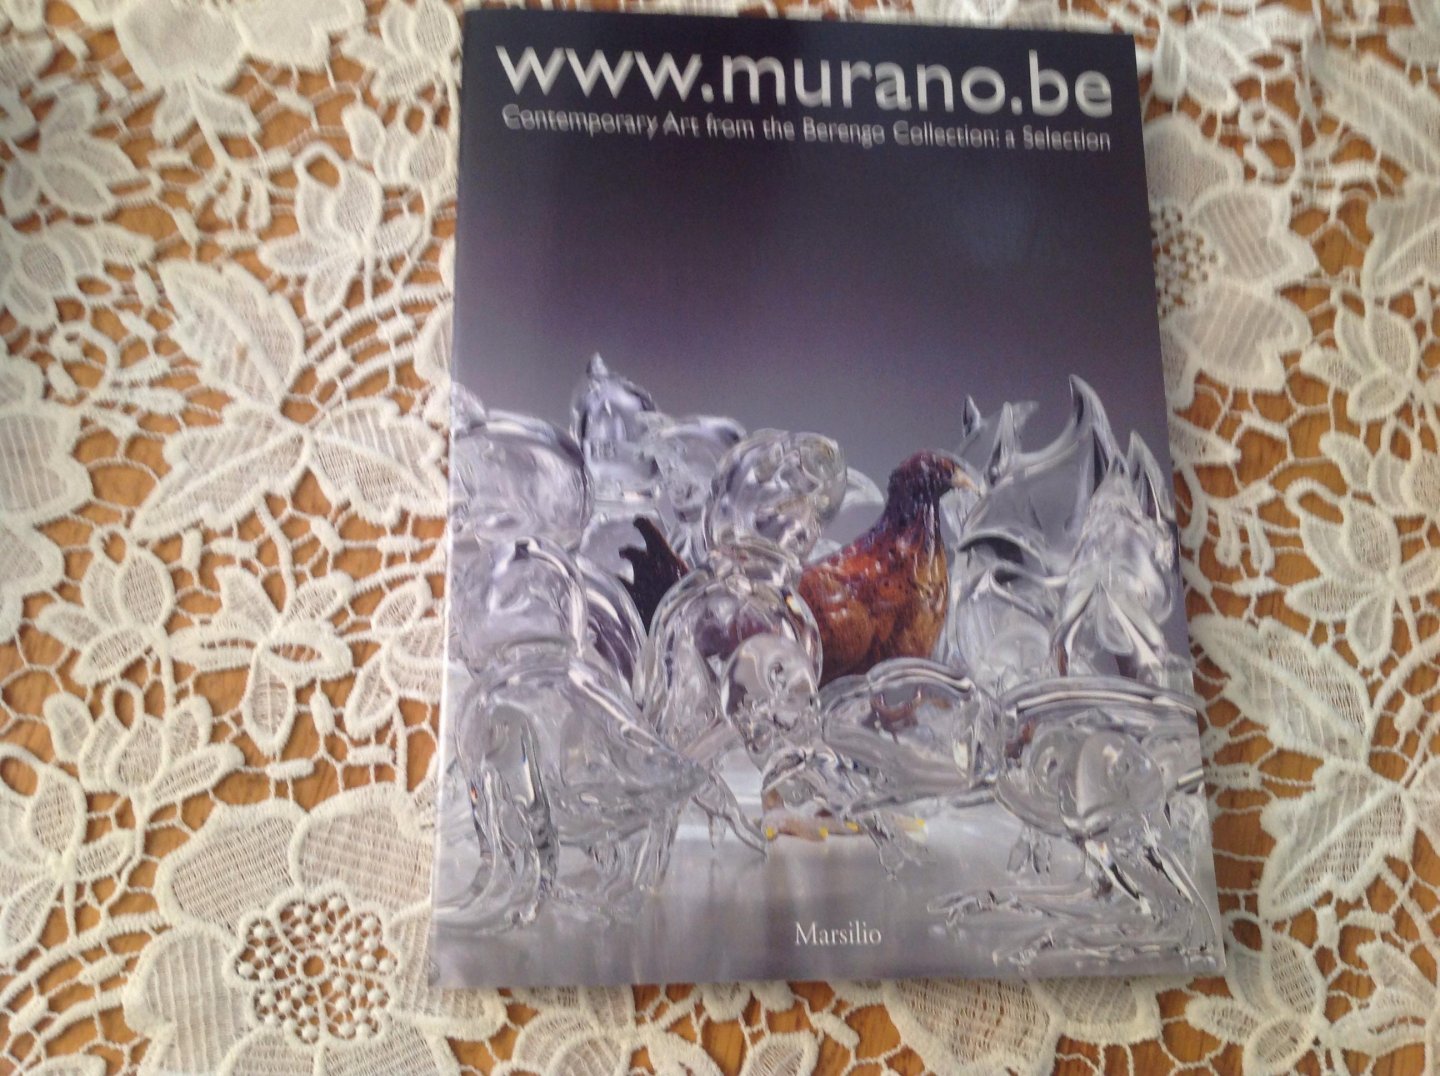 Marsilio - Www. Murano. Be. Contemporary Art from the Berengo Collection: a Selection